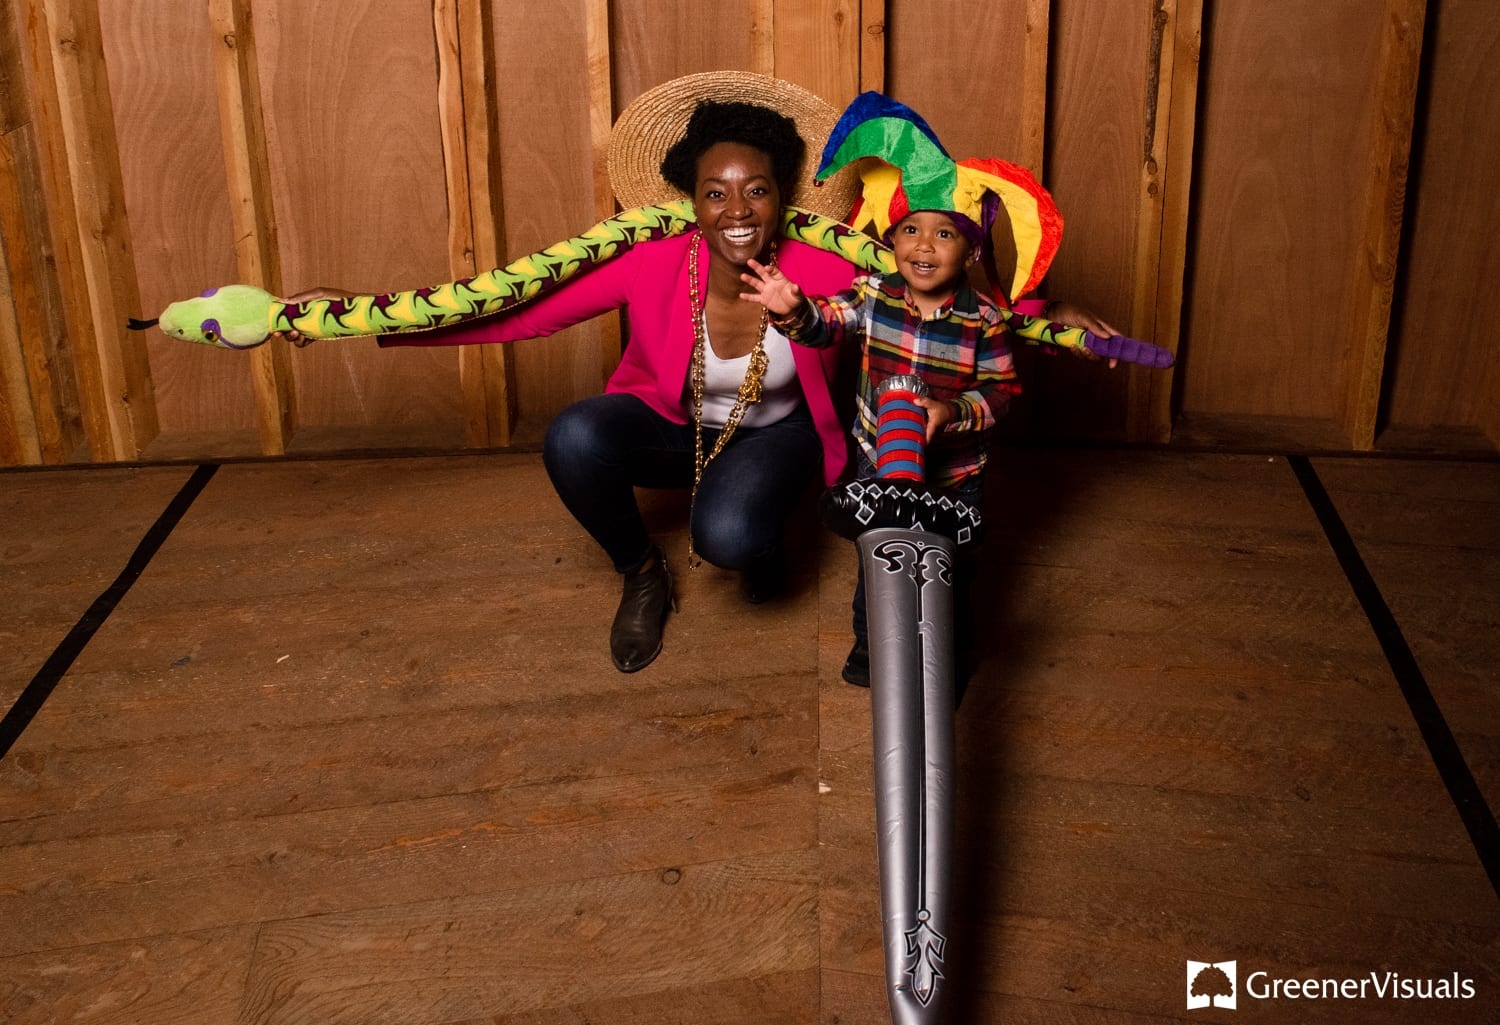 mom-daughter-play-photo-booth-headwaters-ranch